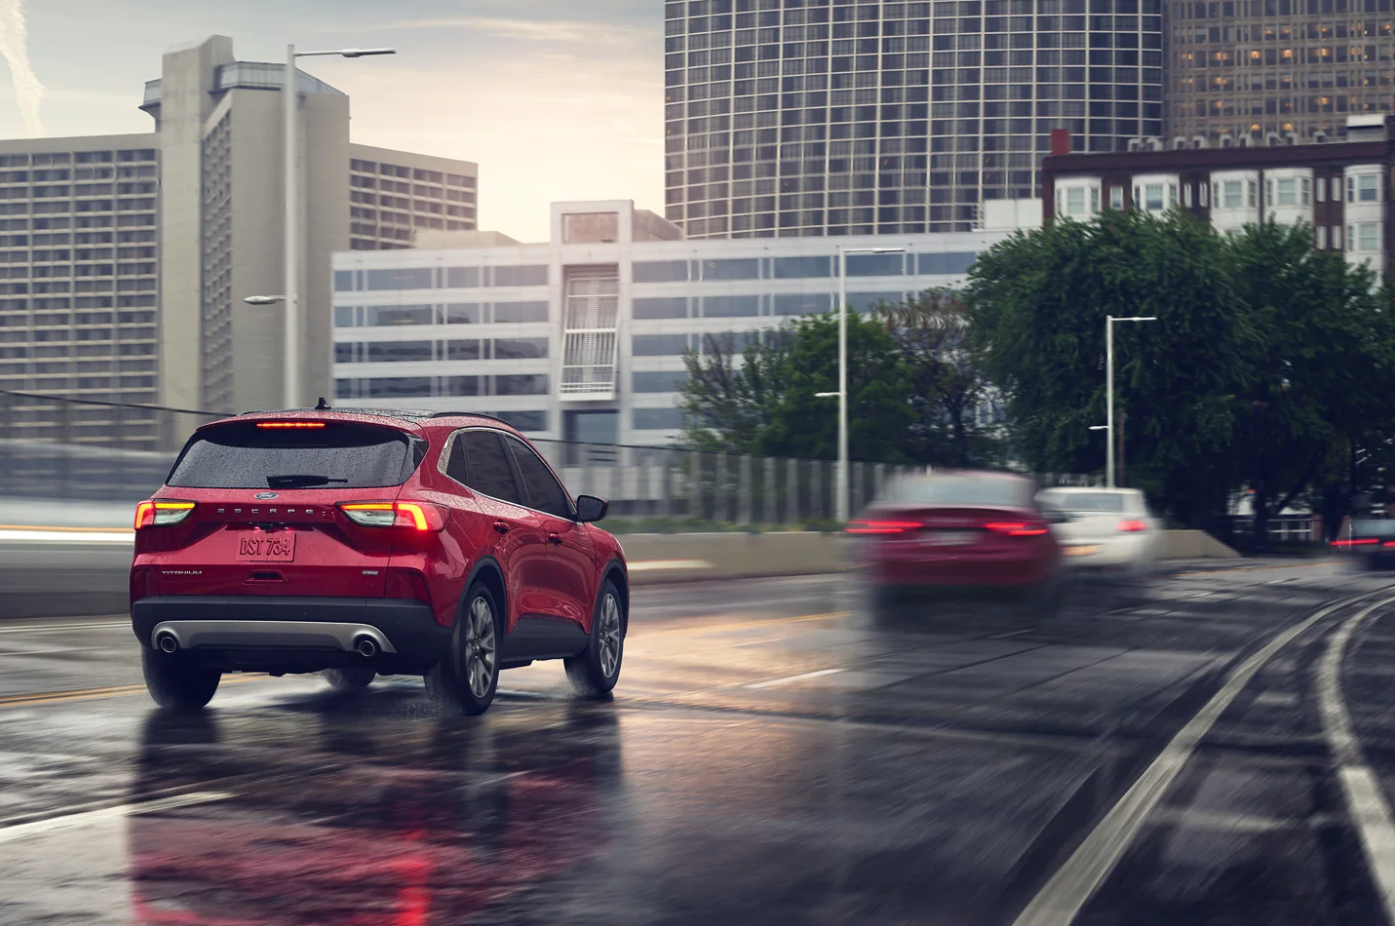 A view of the back of a red 2022 Ford Escape as it drives down a wet street after a rainstorm towards a city skyline